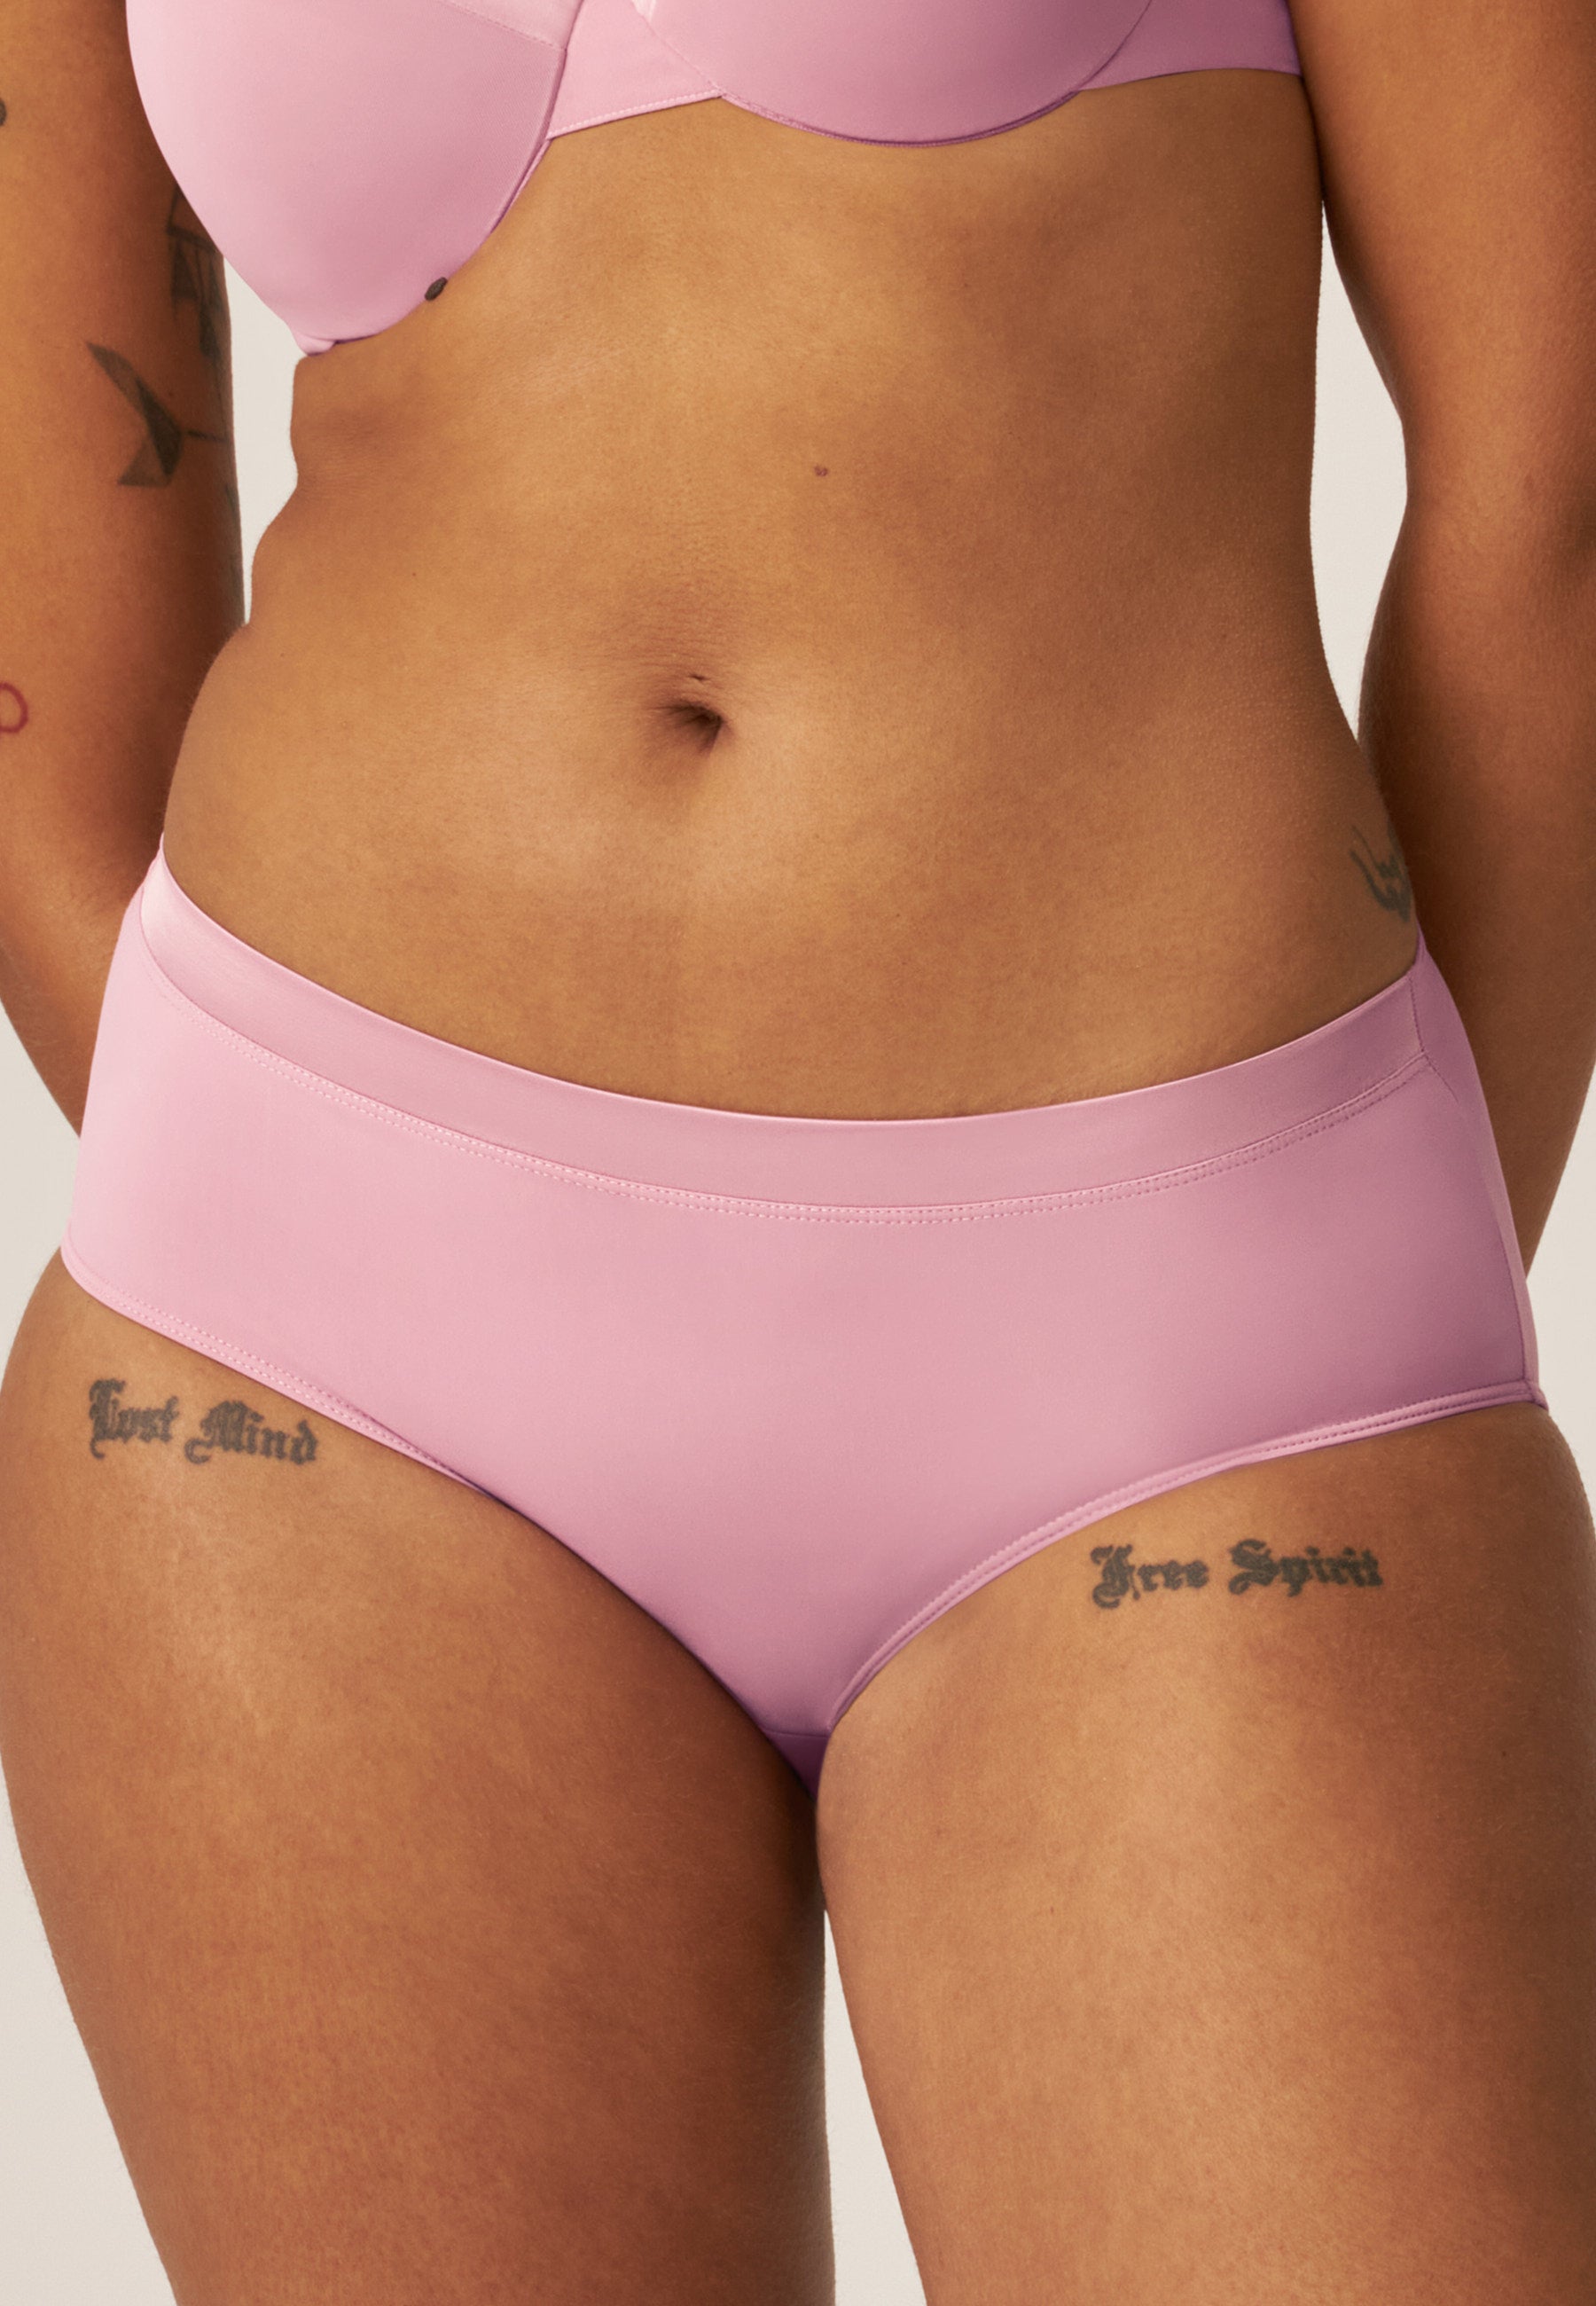 Briefs in different styles - Briefs for every type of woman - buy